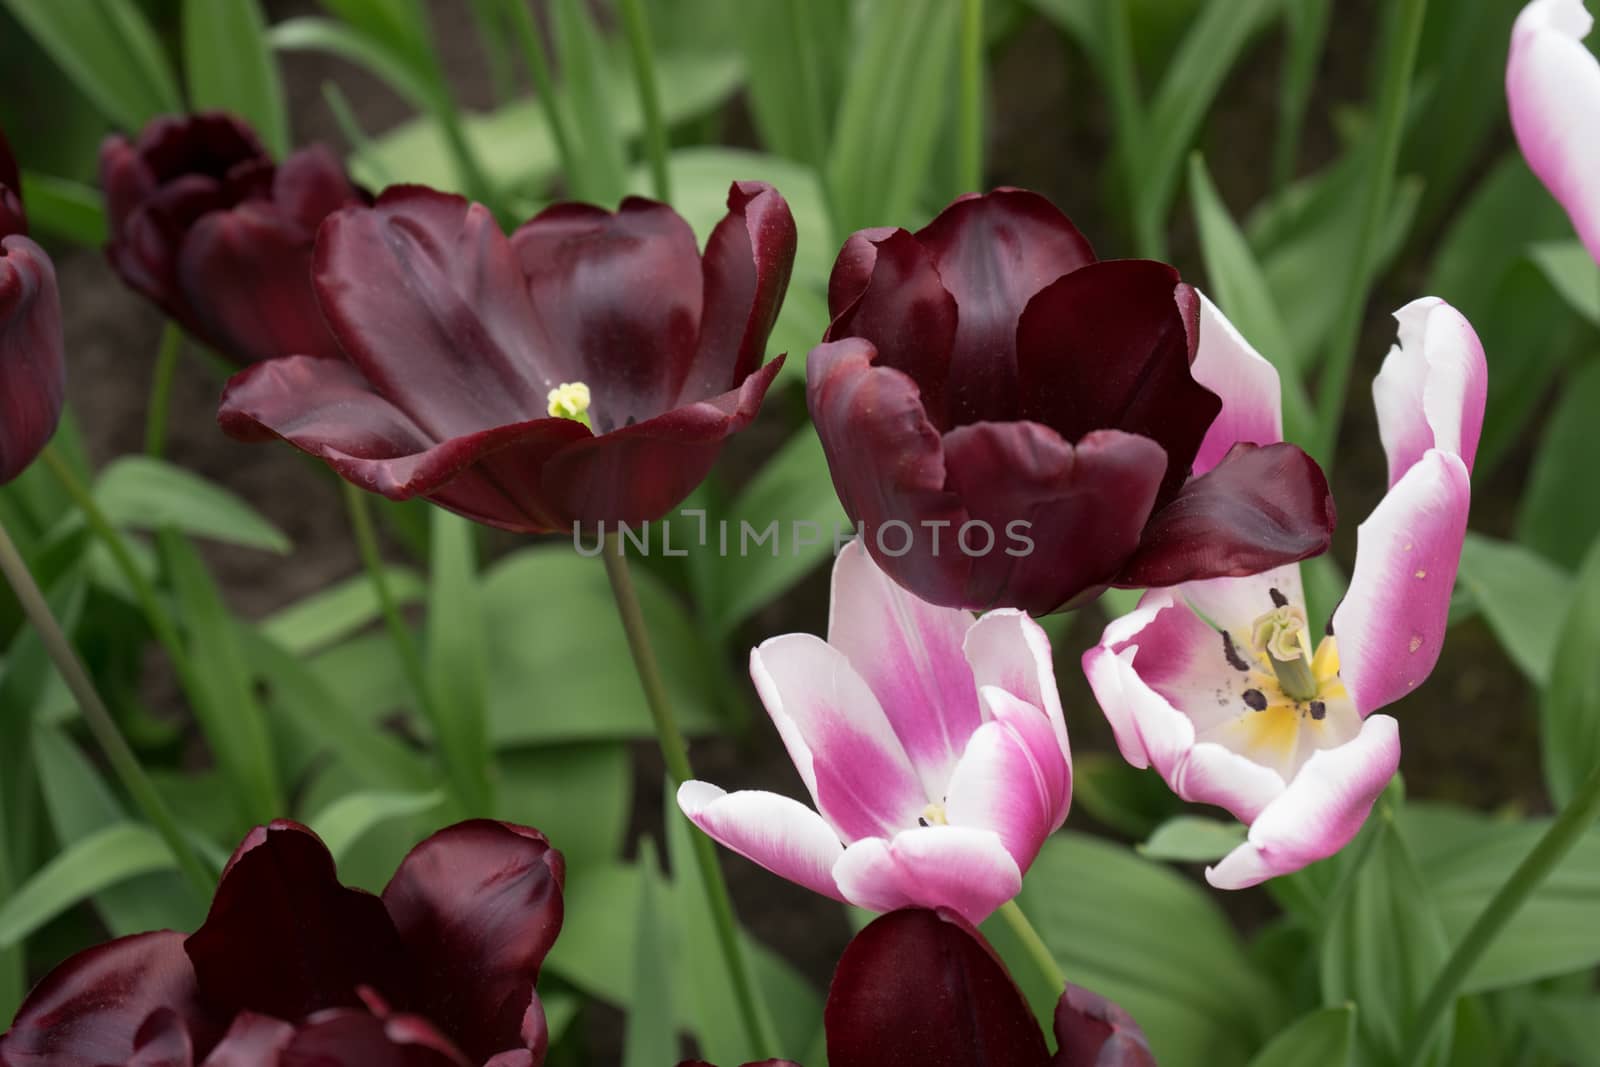 Black and pink colored tulips flowers in a garden in Lisse, Netherlands, Europe on a bright summer day